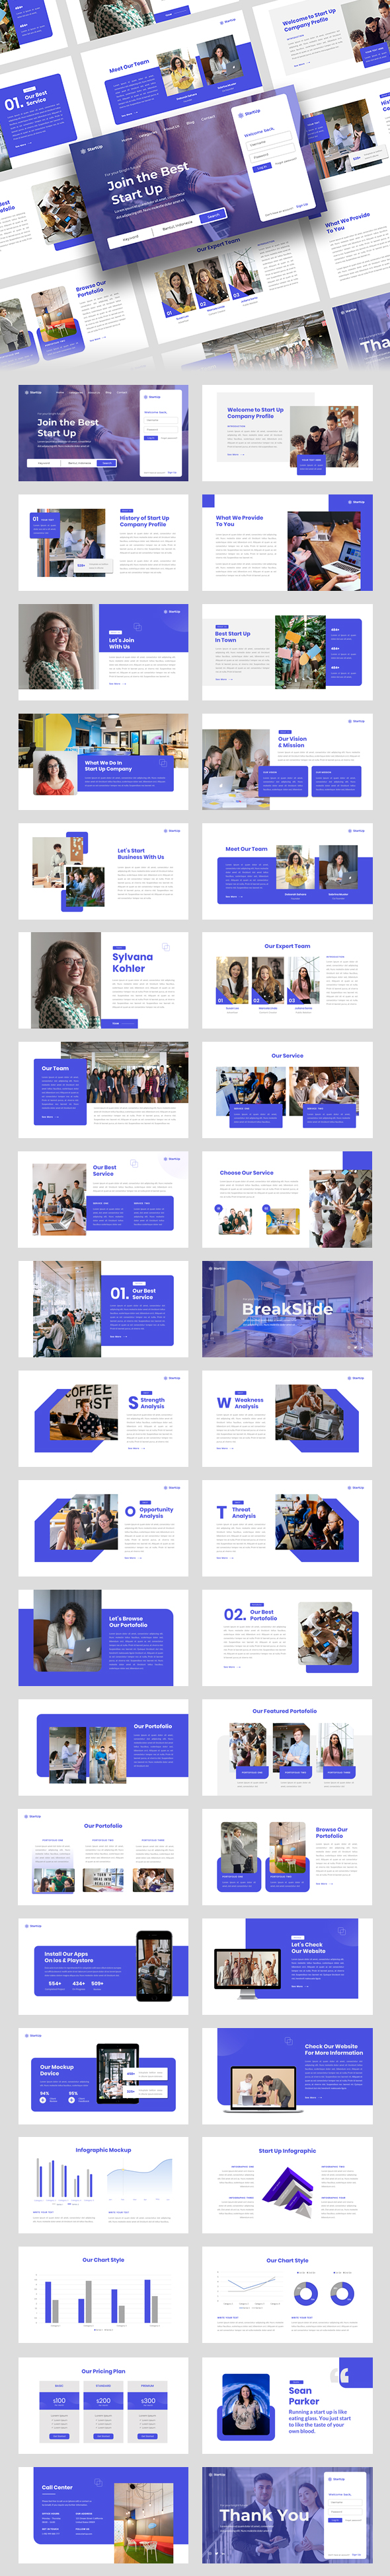 [DOWNLOAD]Start Up – Creative Business PowerPoint Template